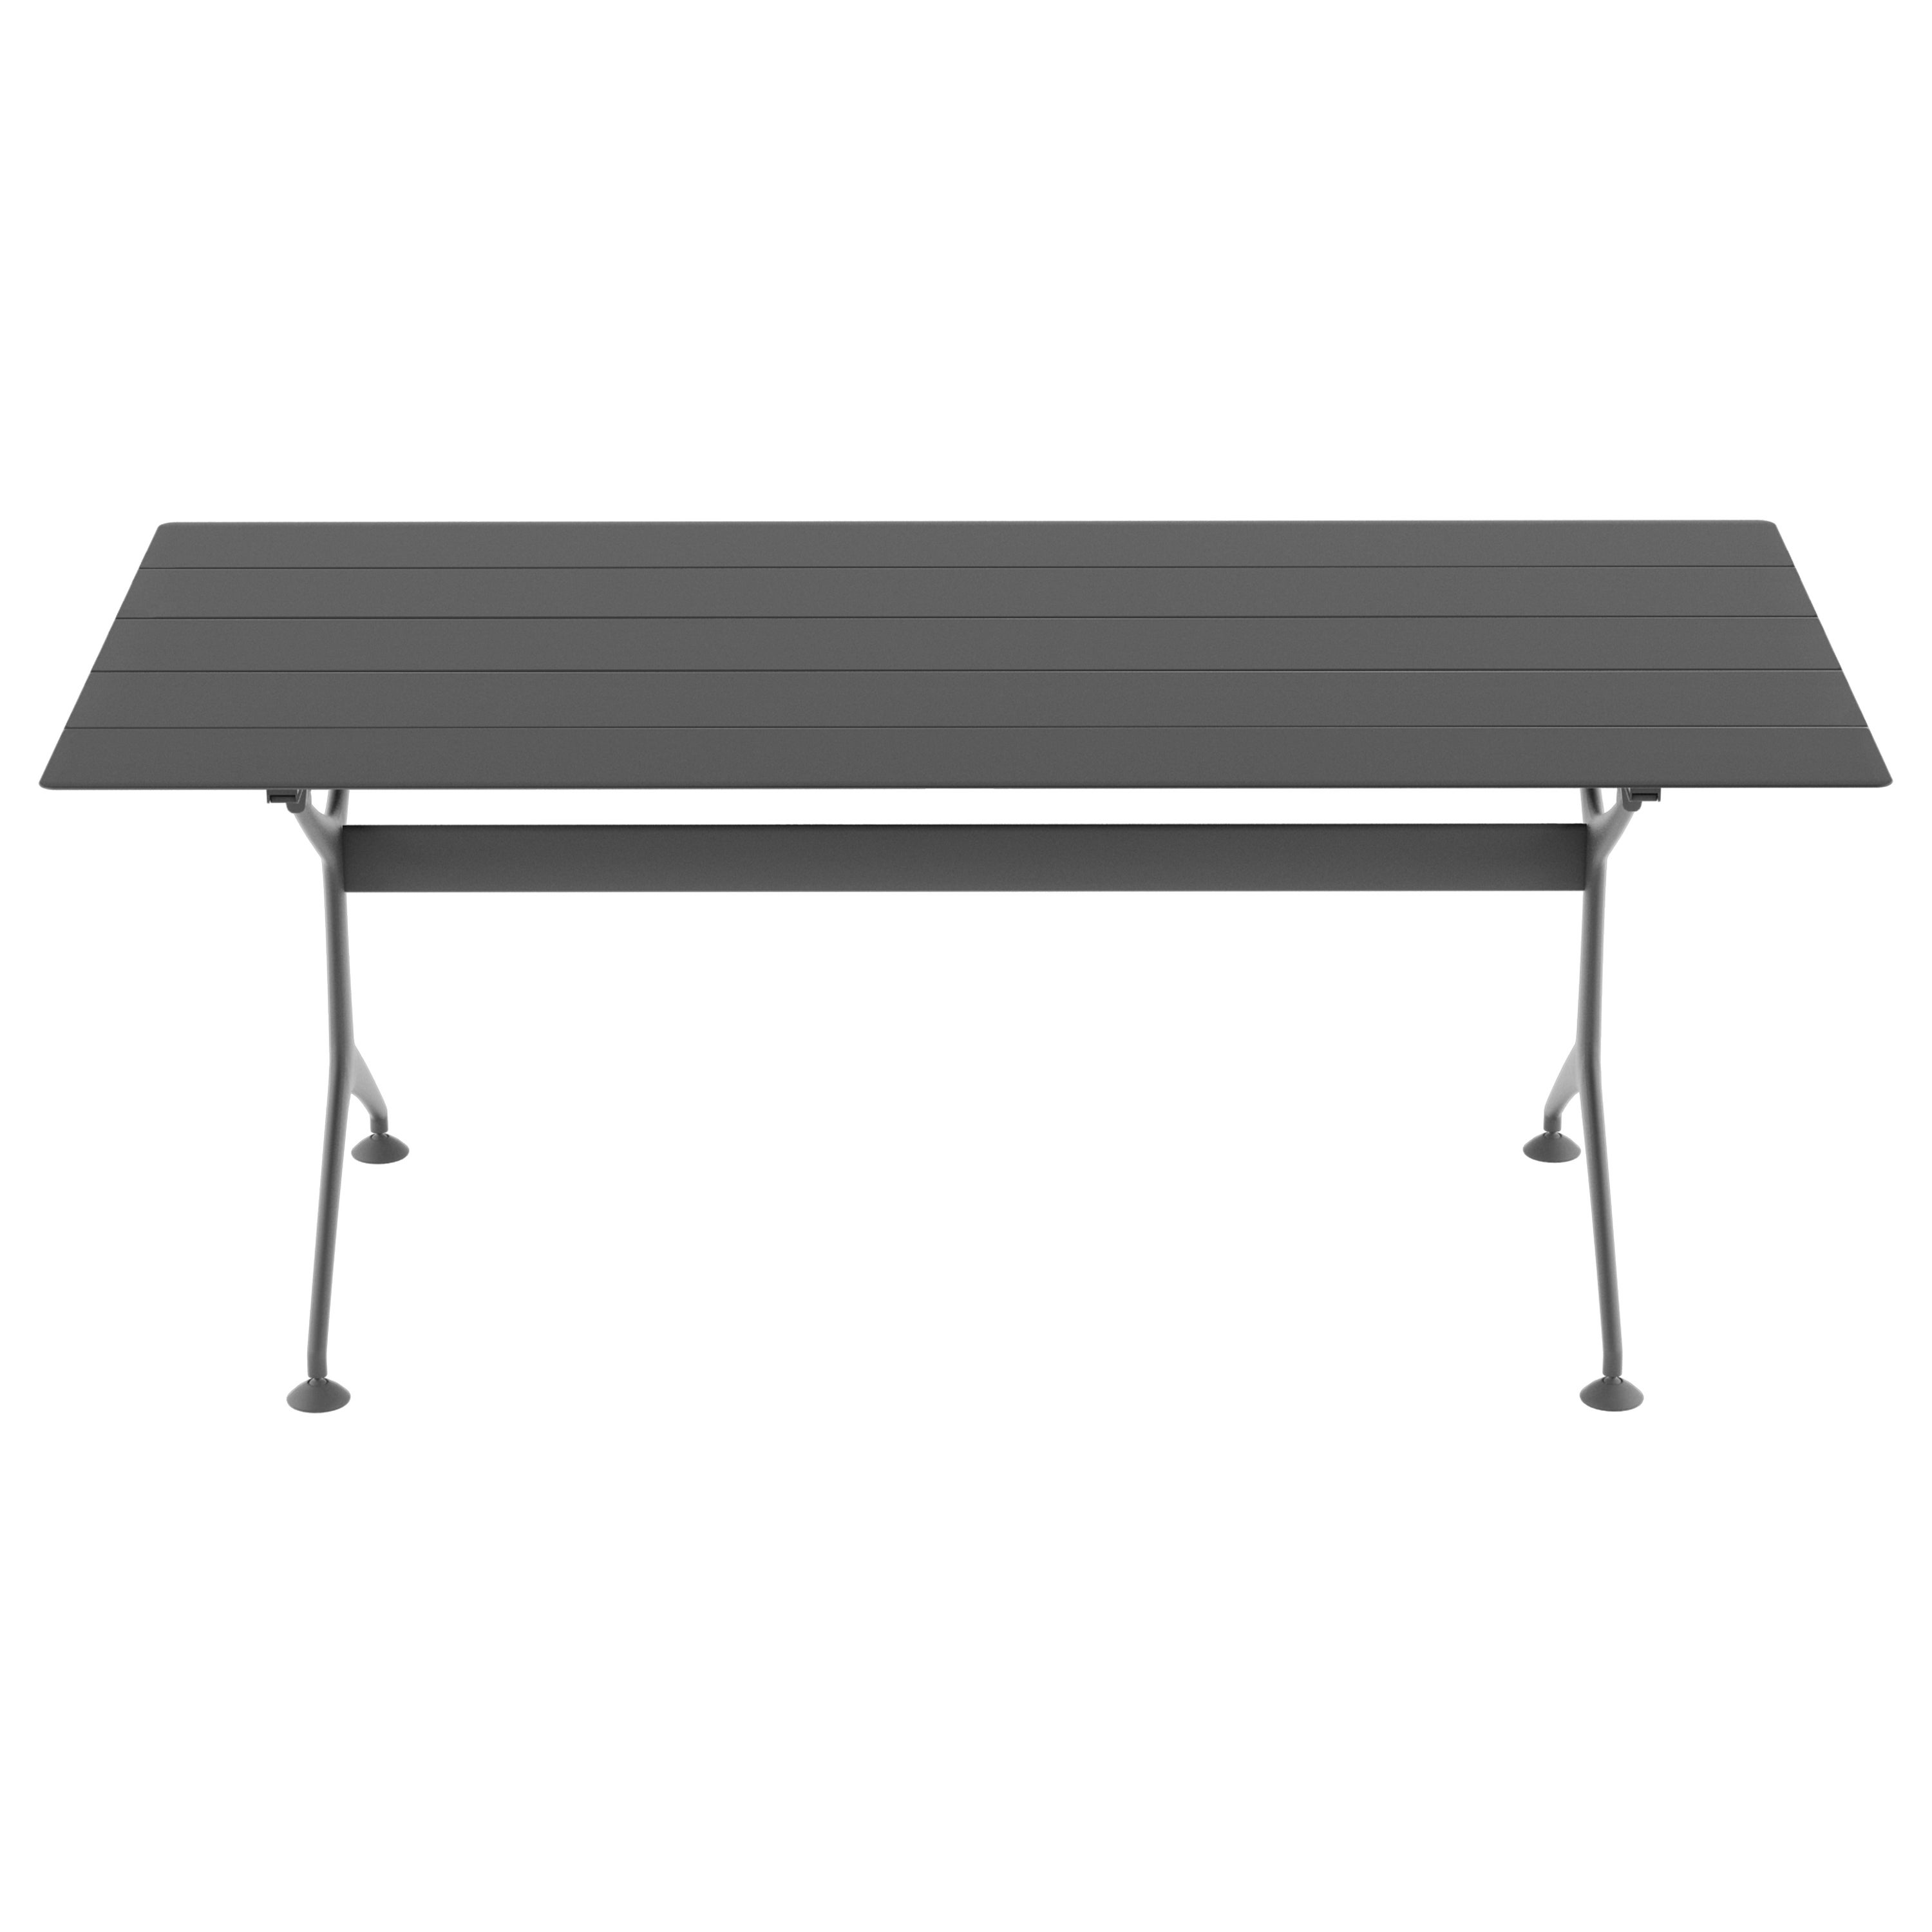 Alias 190 Outdoor Frametable in Graphite Grey Lacquered Aluminum Slats  For Sale